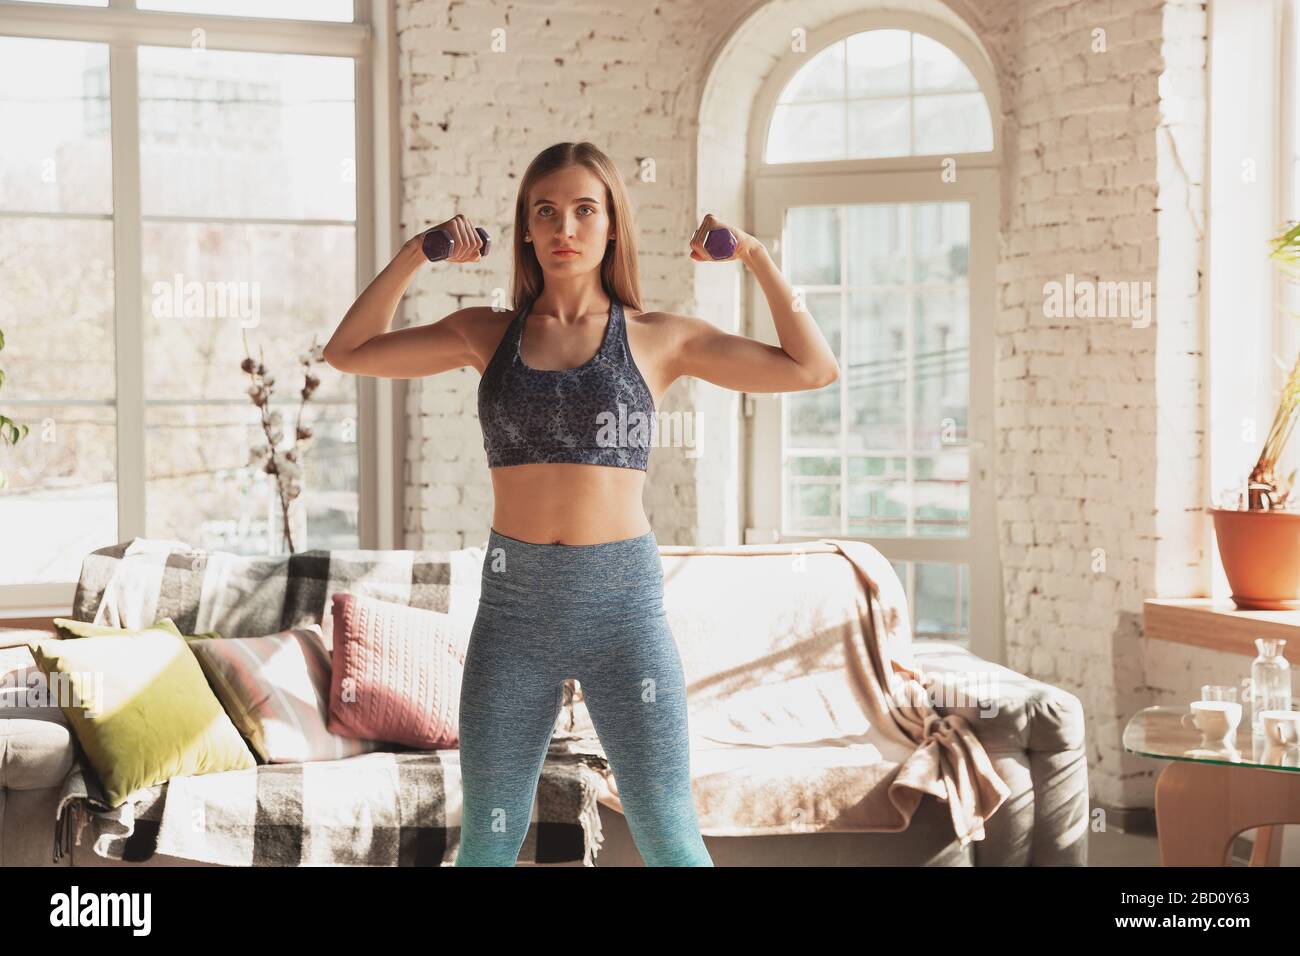 Young woman teaching at home online courses of fitness, aerobic, sporty lifestyle while quarantine. Getting active while isolated, wellness, movement concept. Exercises with weights, balance. Stock Photo